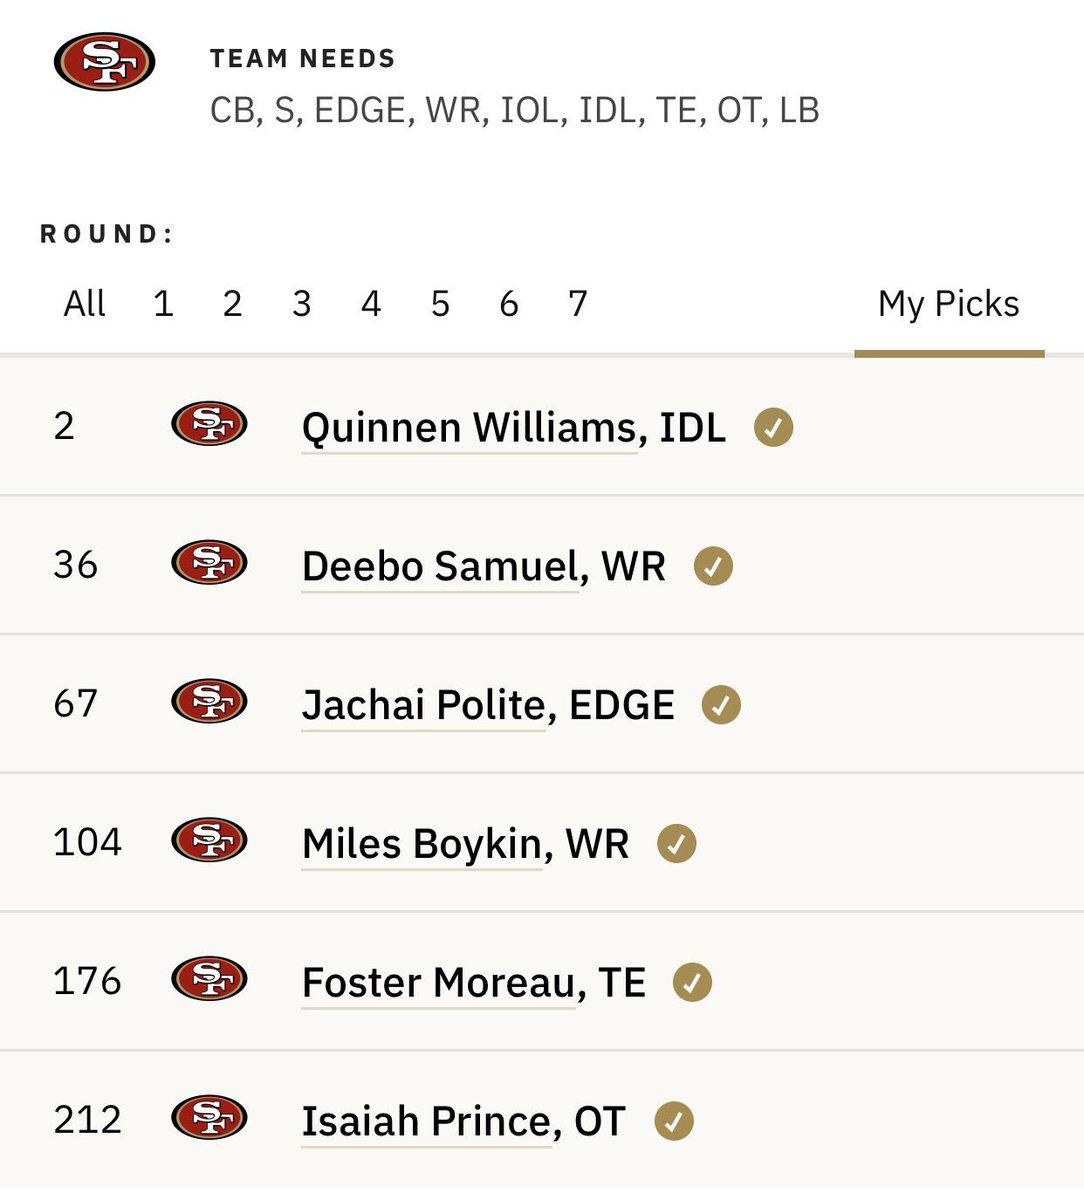 So here’s who I took. And if you look through the that previous thread you can see why I took each guy. Tried to go the “value route” thinking I could take Williams and edge in the 3rd. That would’ve been a FAIL lol shit is hard 